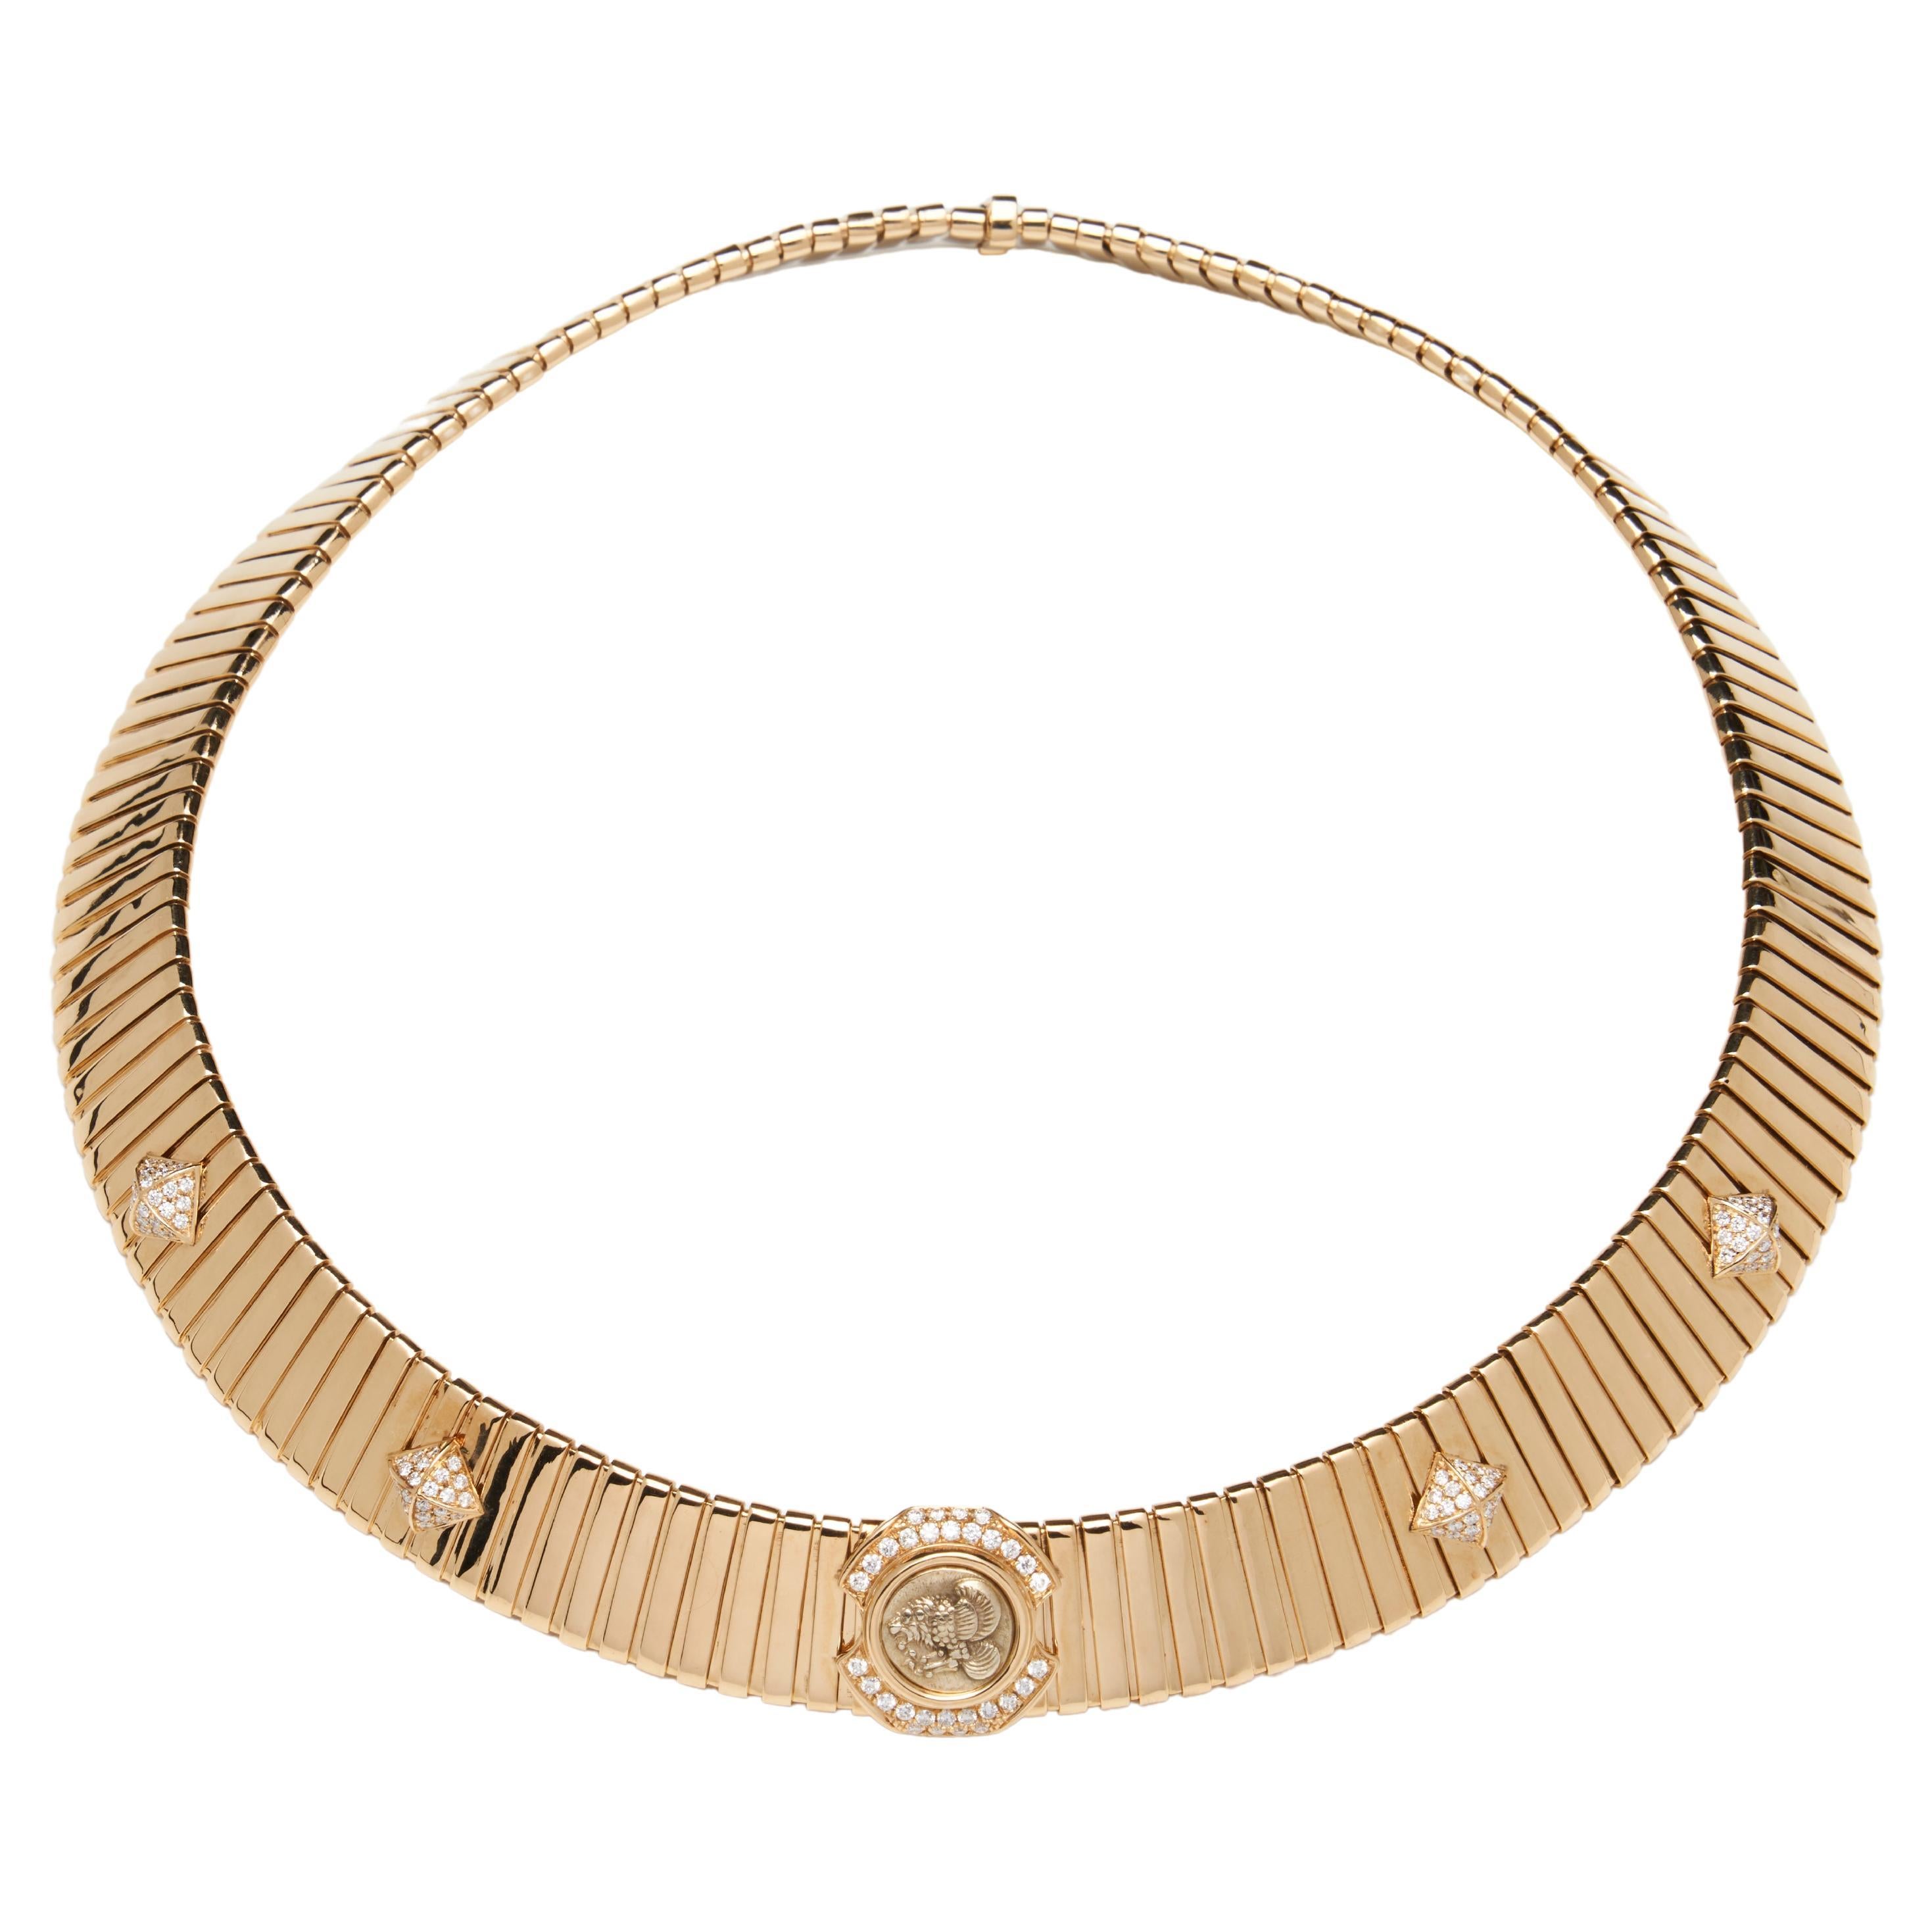 18k Gold Greek Coin Omega Collar Necklace with Diamonds